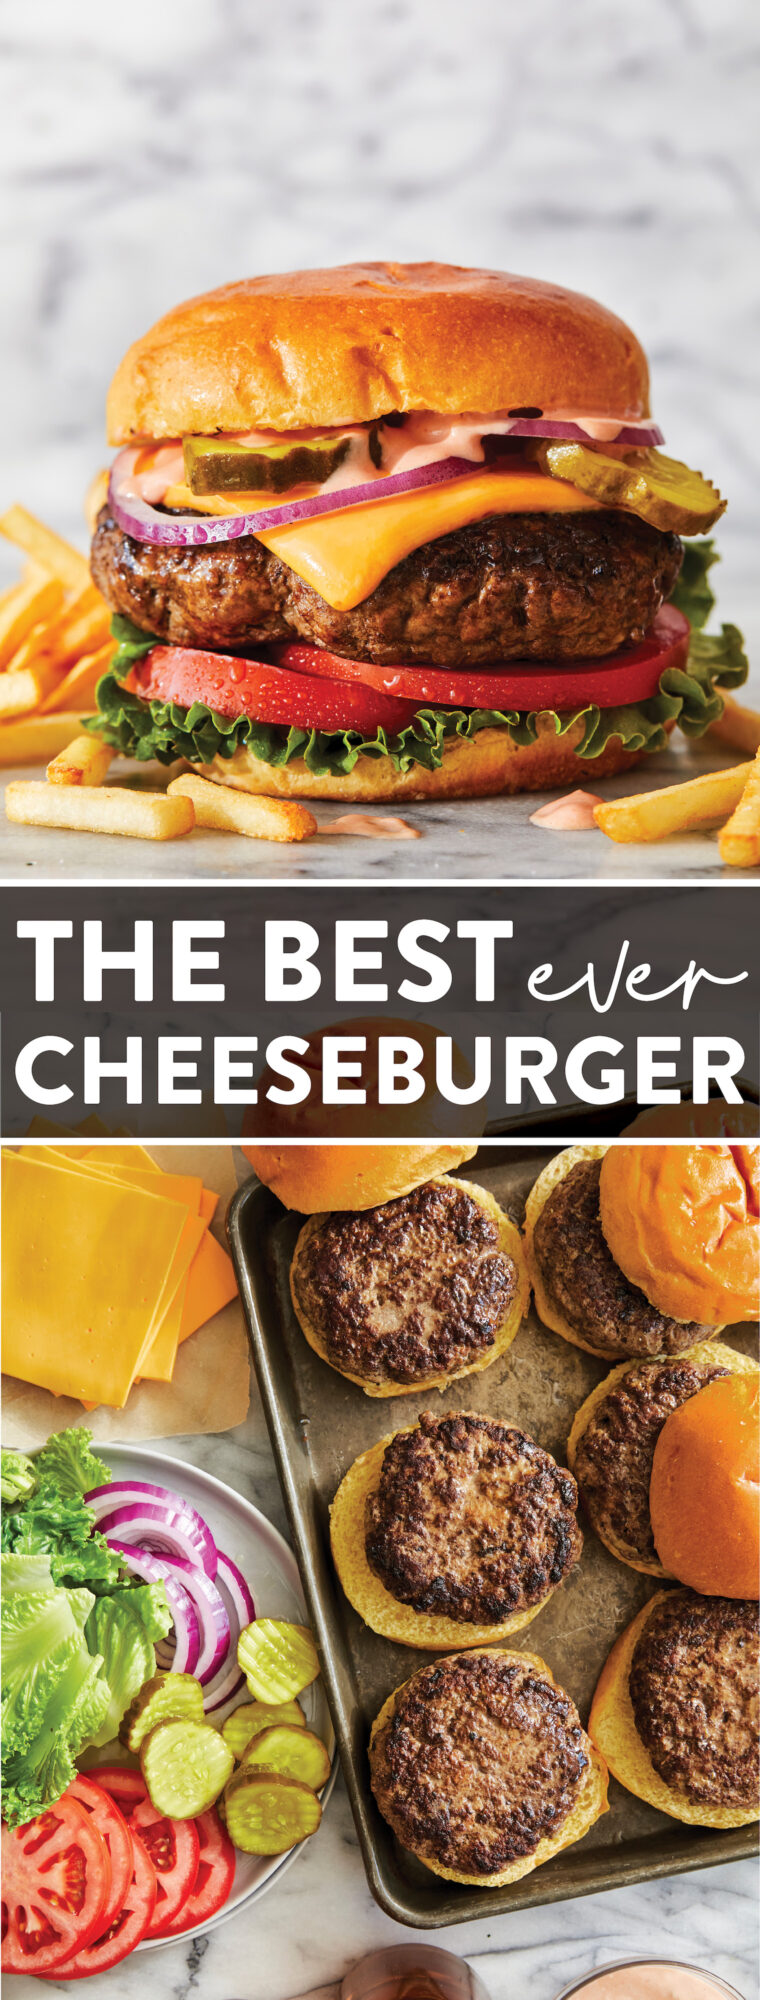 The Best Ever Cheeseburger - How to make THE BEST cheeseburger! Perfect burger patties every. single. time. Includes an epic burger sauce too!